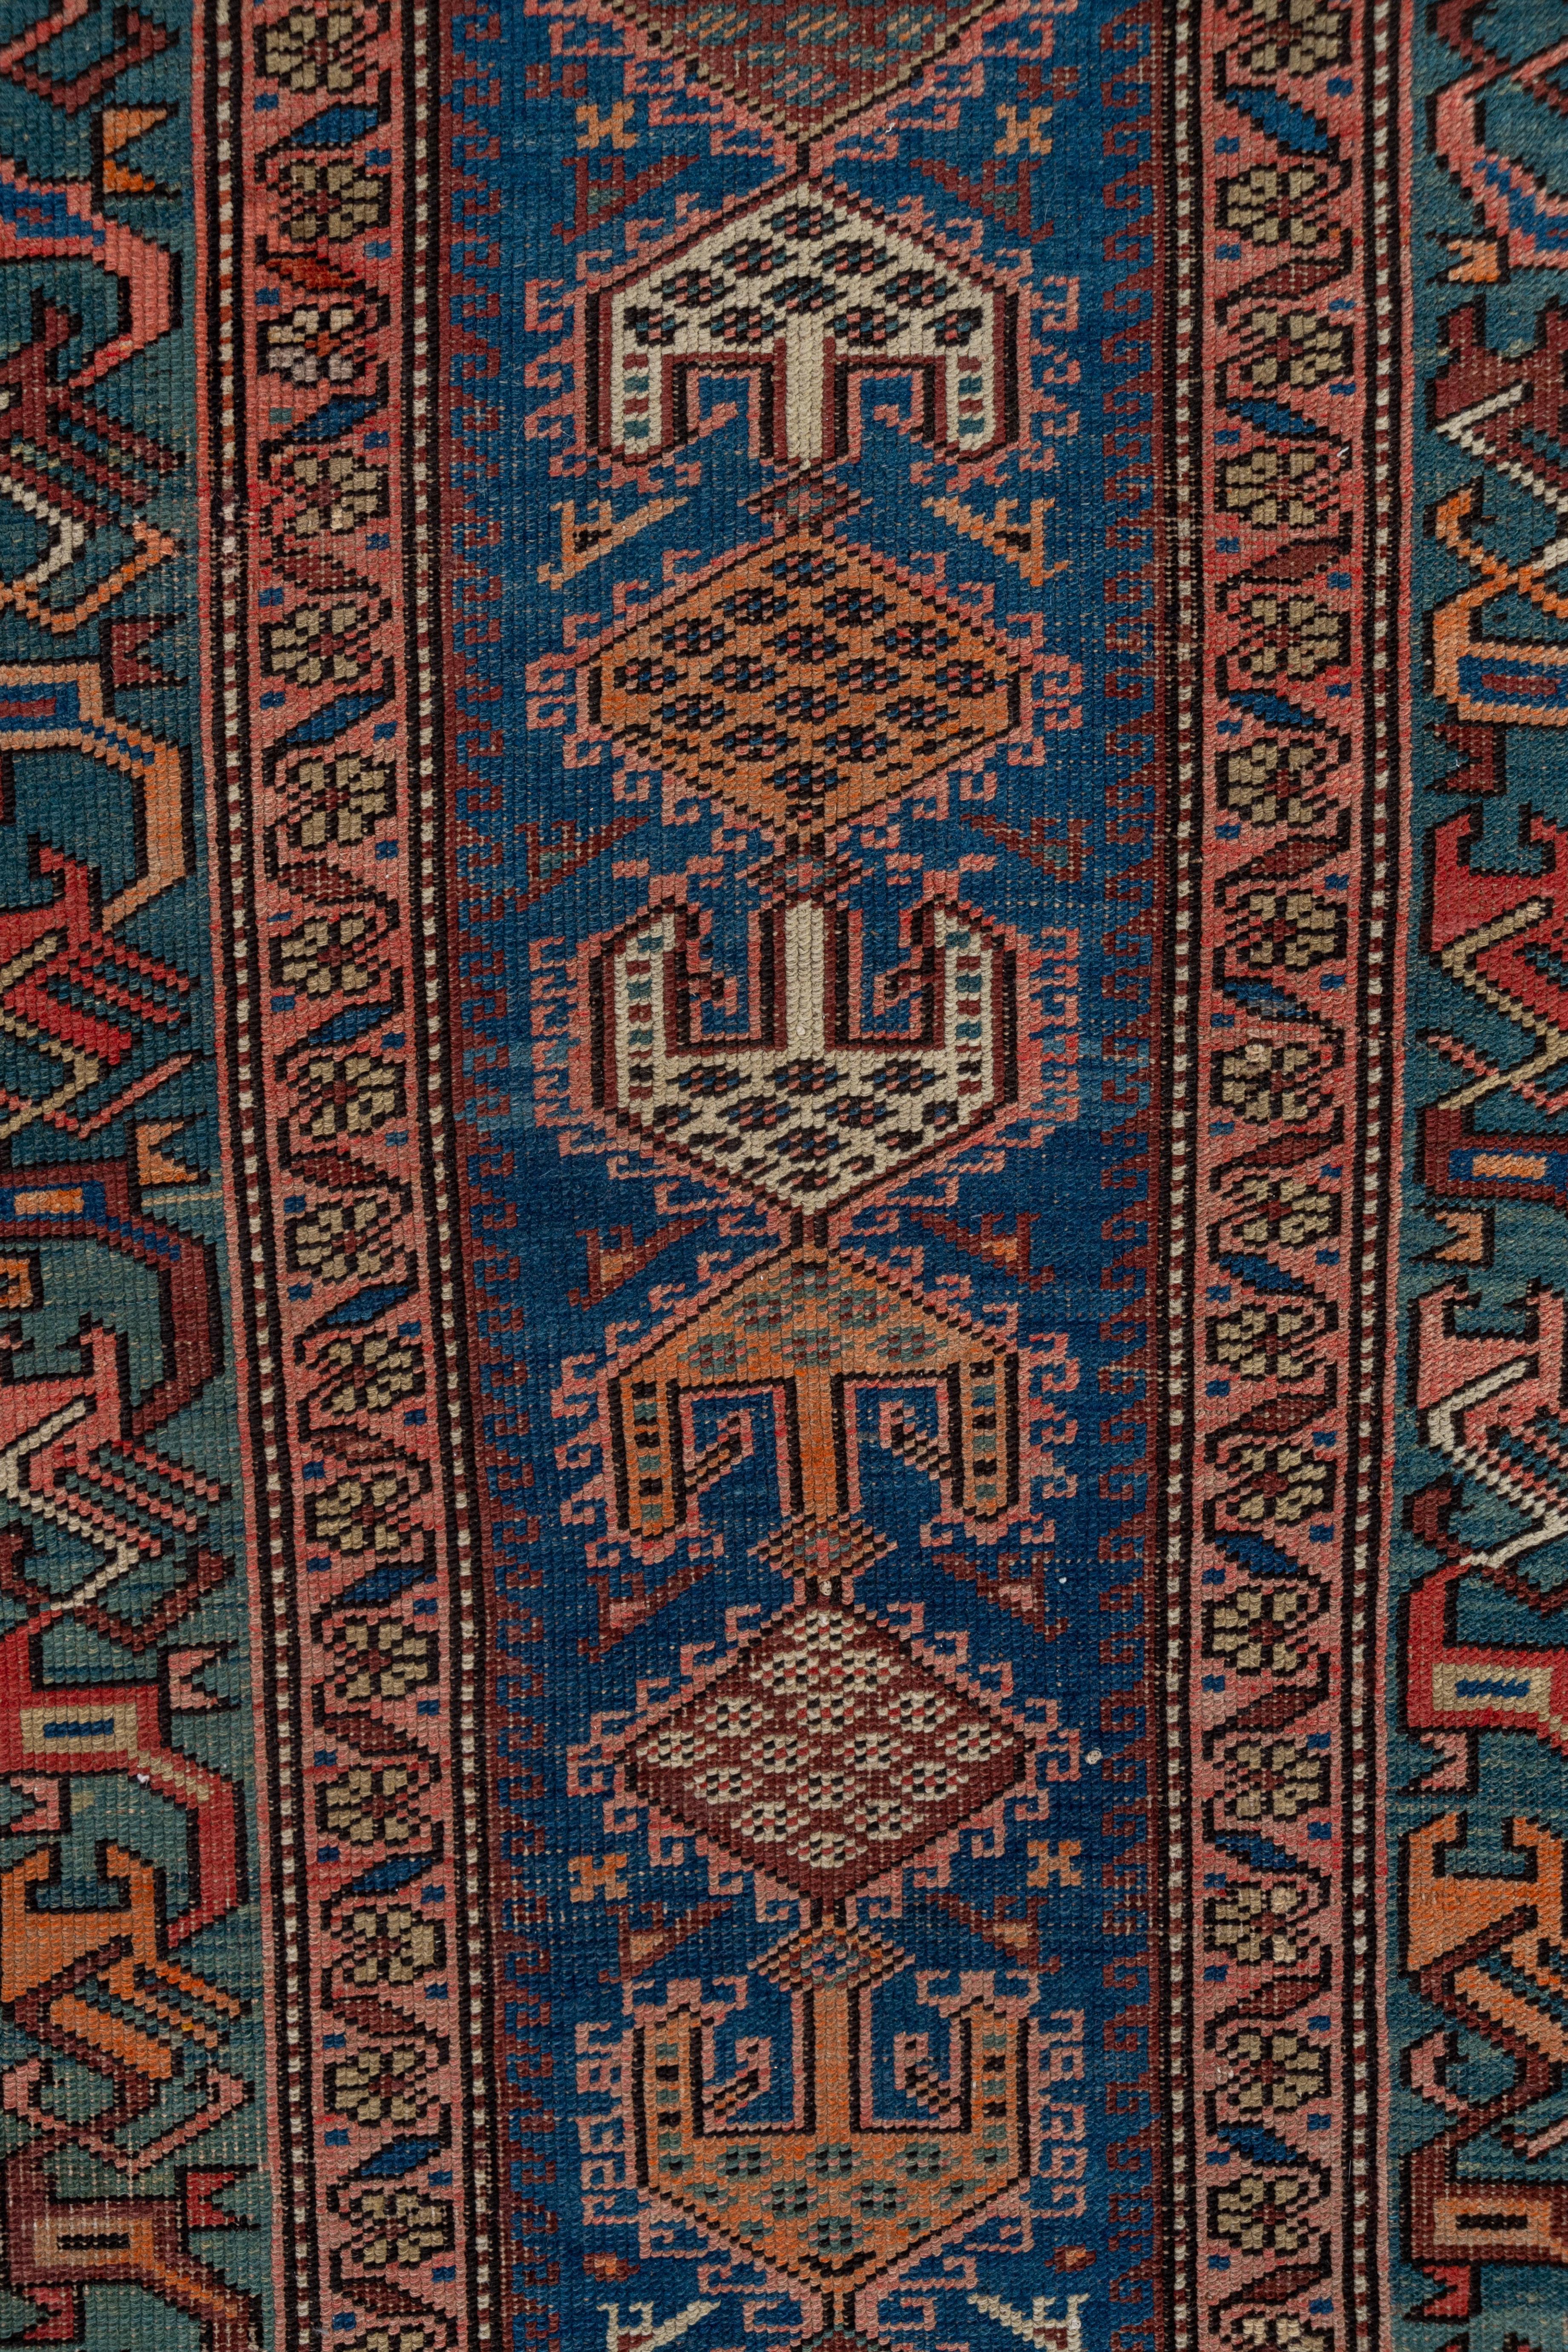 From the Caucasus or northwest Persia, this medium blue field runner has a lozenge and trident pattern in orange, ivory and blue-green, within a deep blue-green 'dragon vine' border. Small birds are set pairwise in the field.